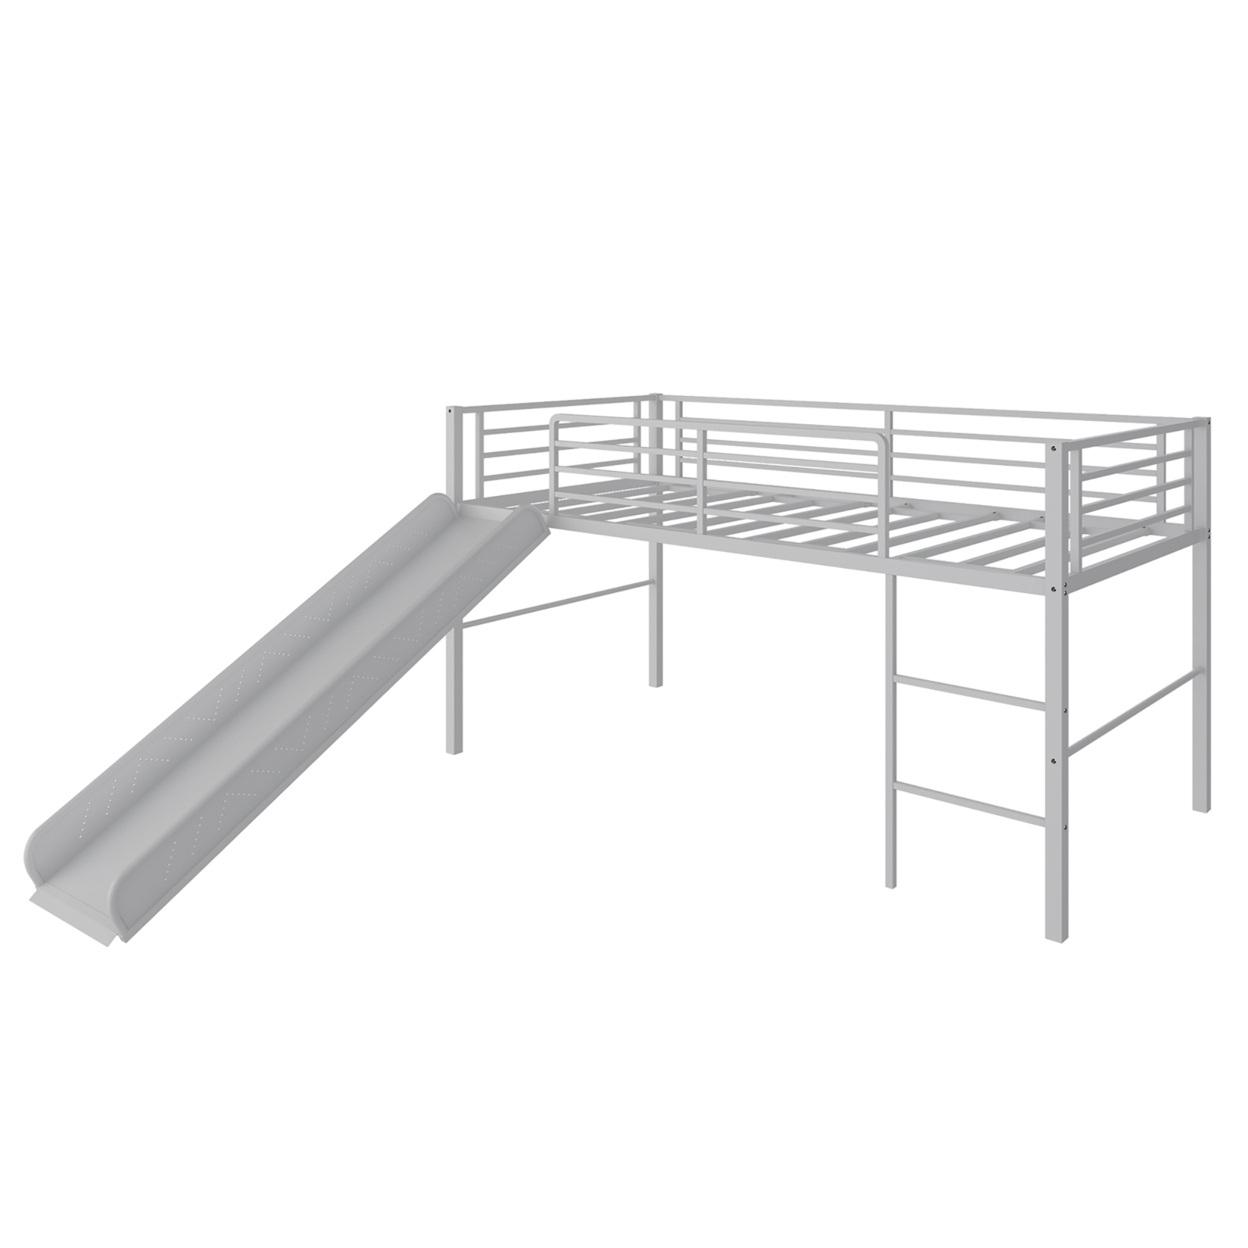 Twin Metal Loft Bed With Slide Guardrails Built-in Ladder Low Bed Frame - Silver